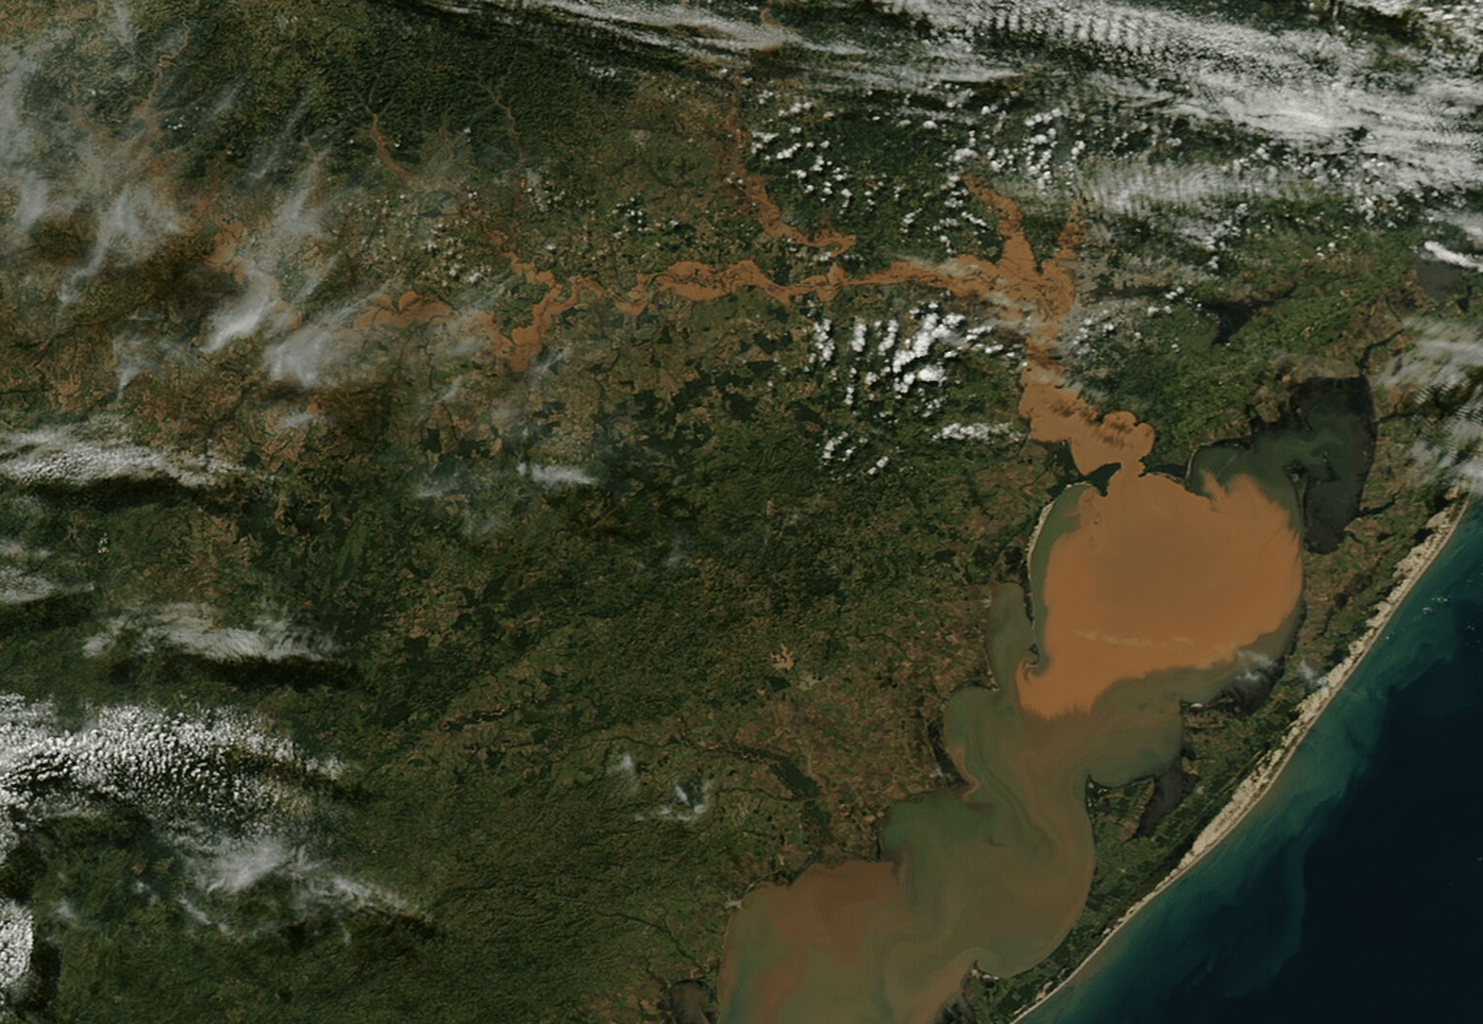 An image shows severe flooding in southern Brazil with muddy floodwater.